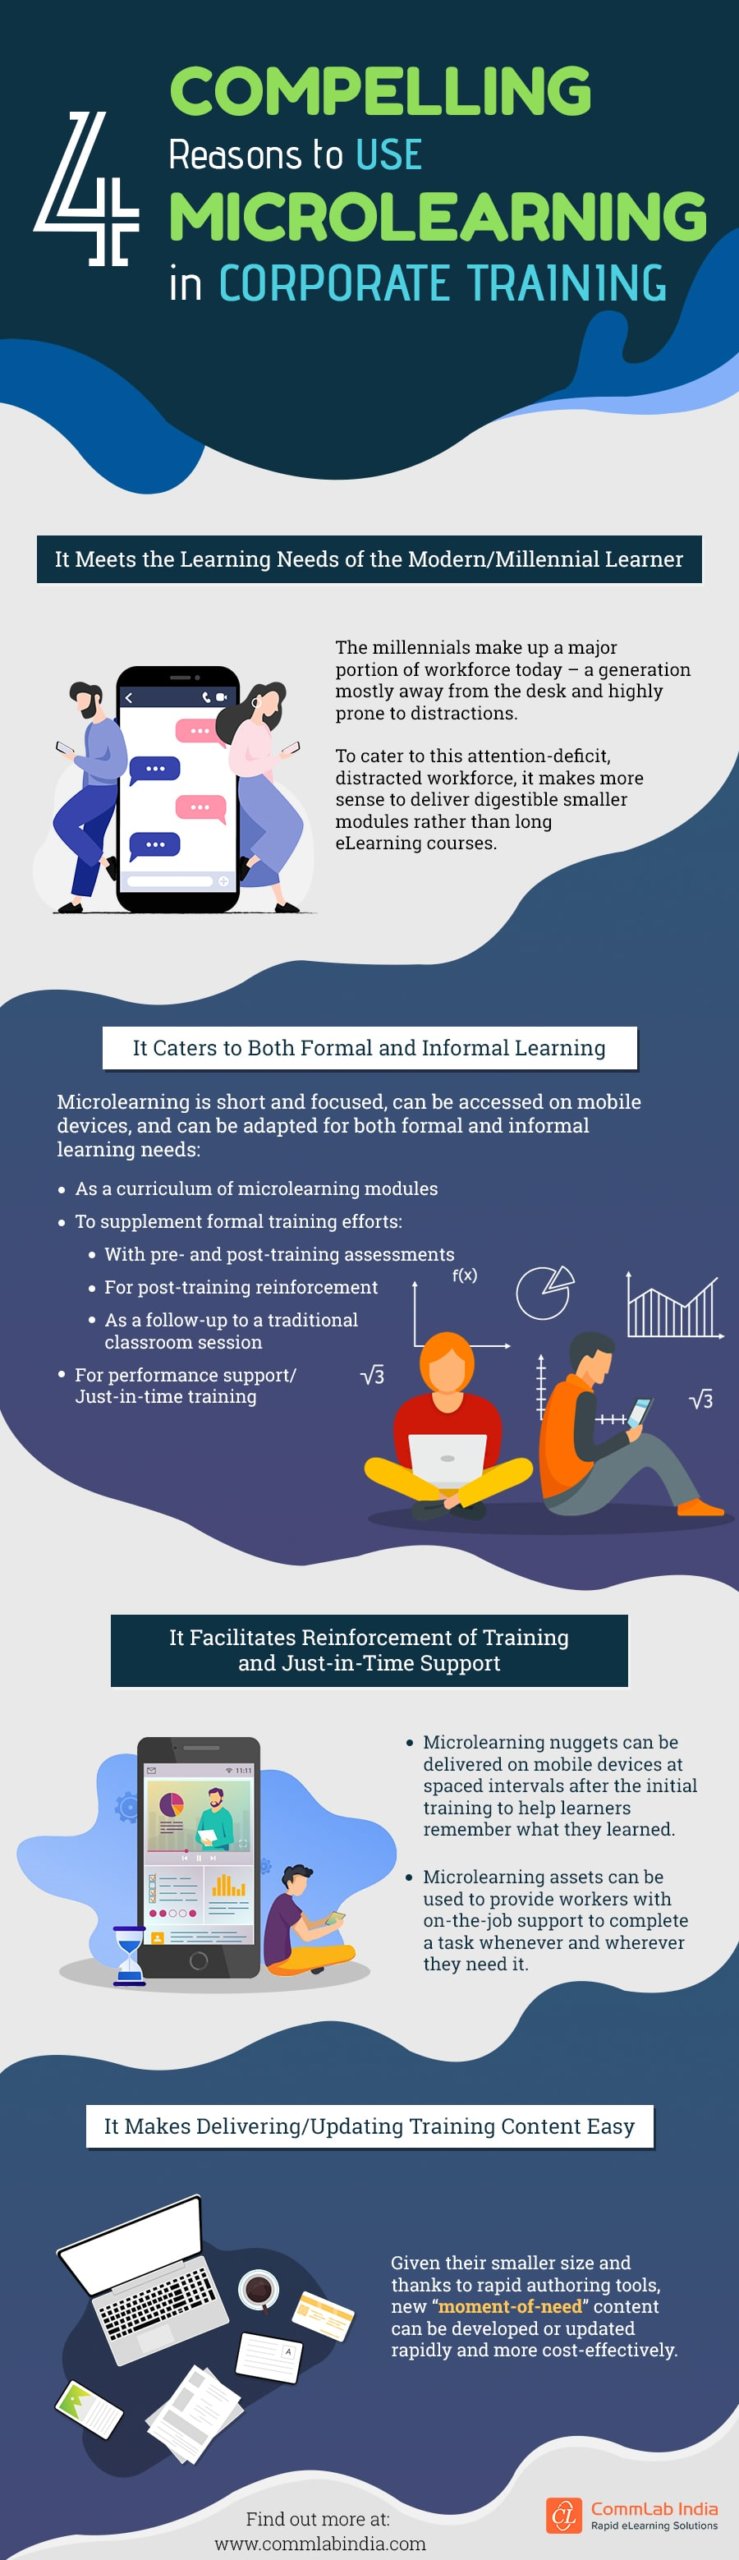 Microlearning in Corporate Training: Why Use It?